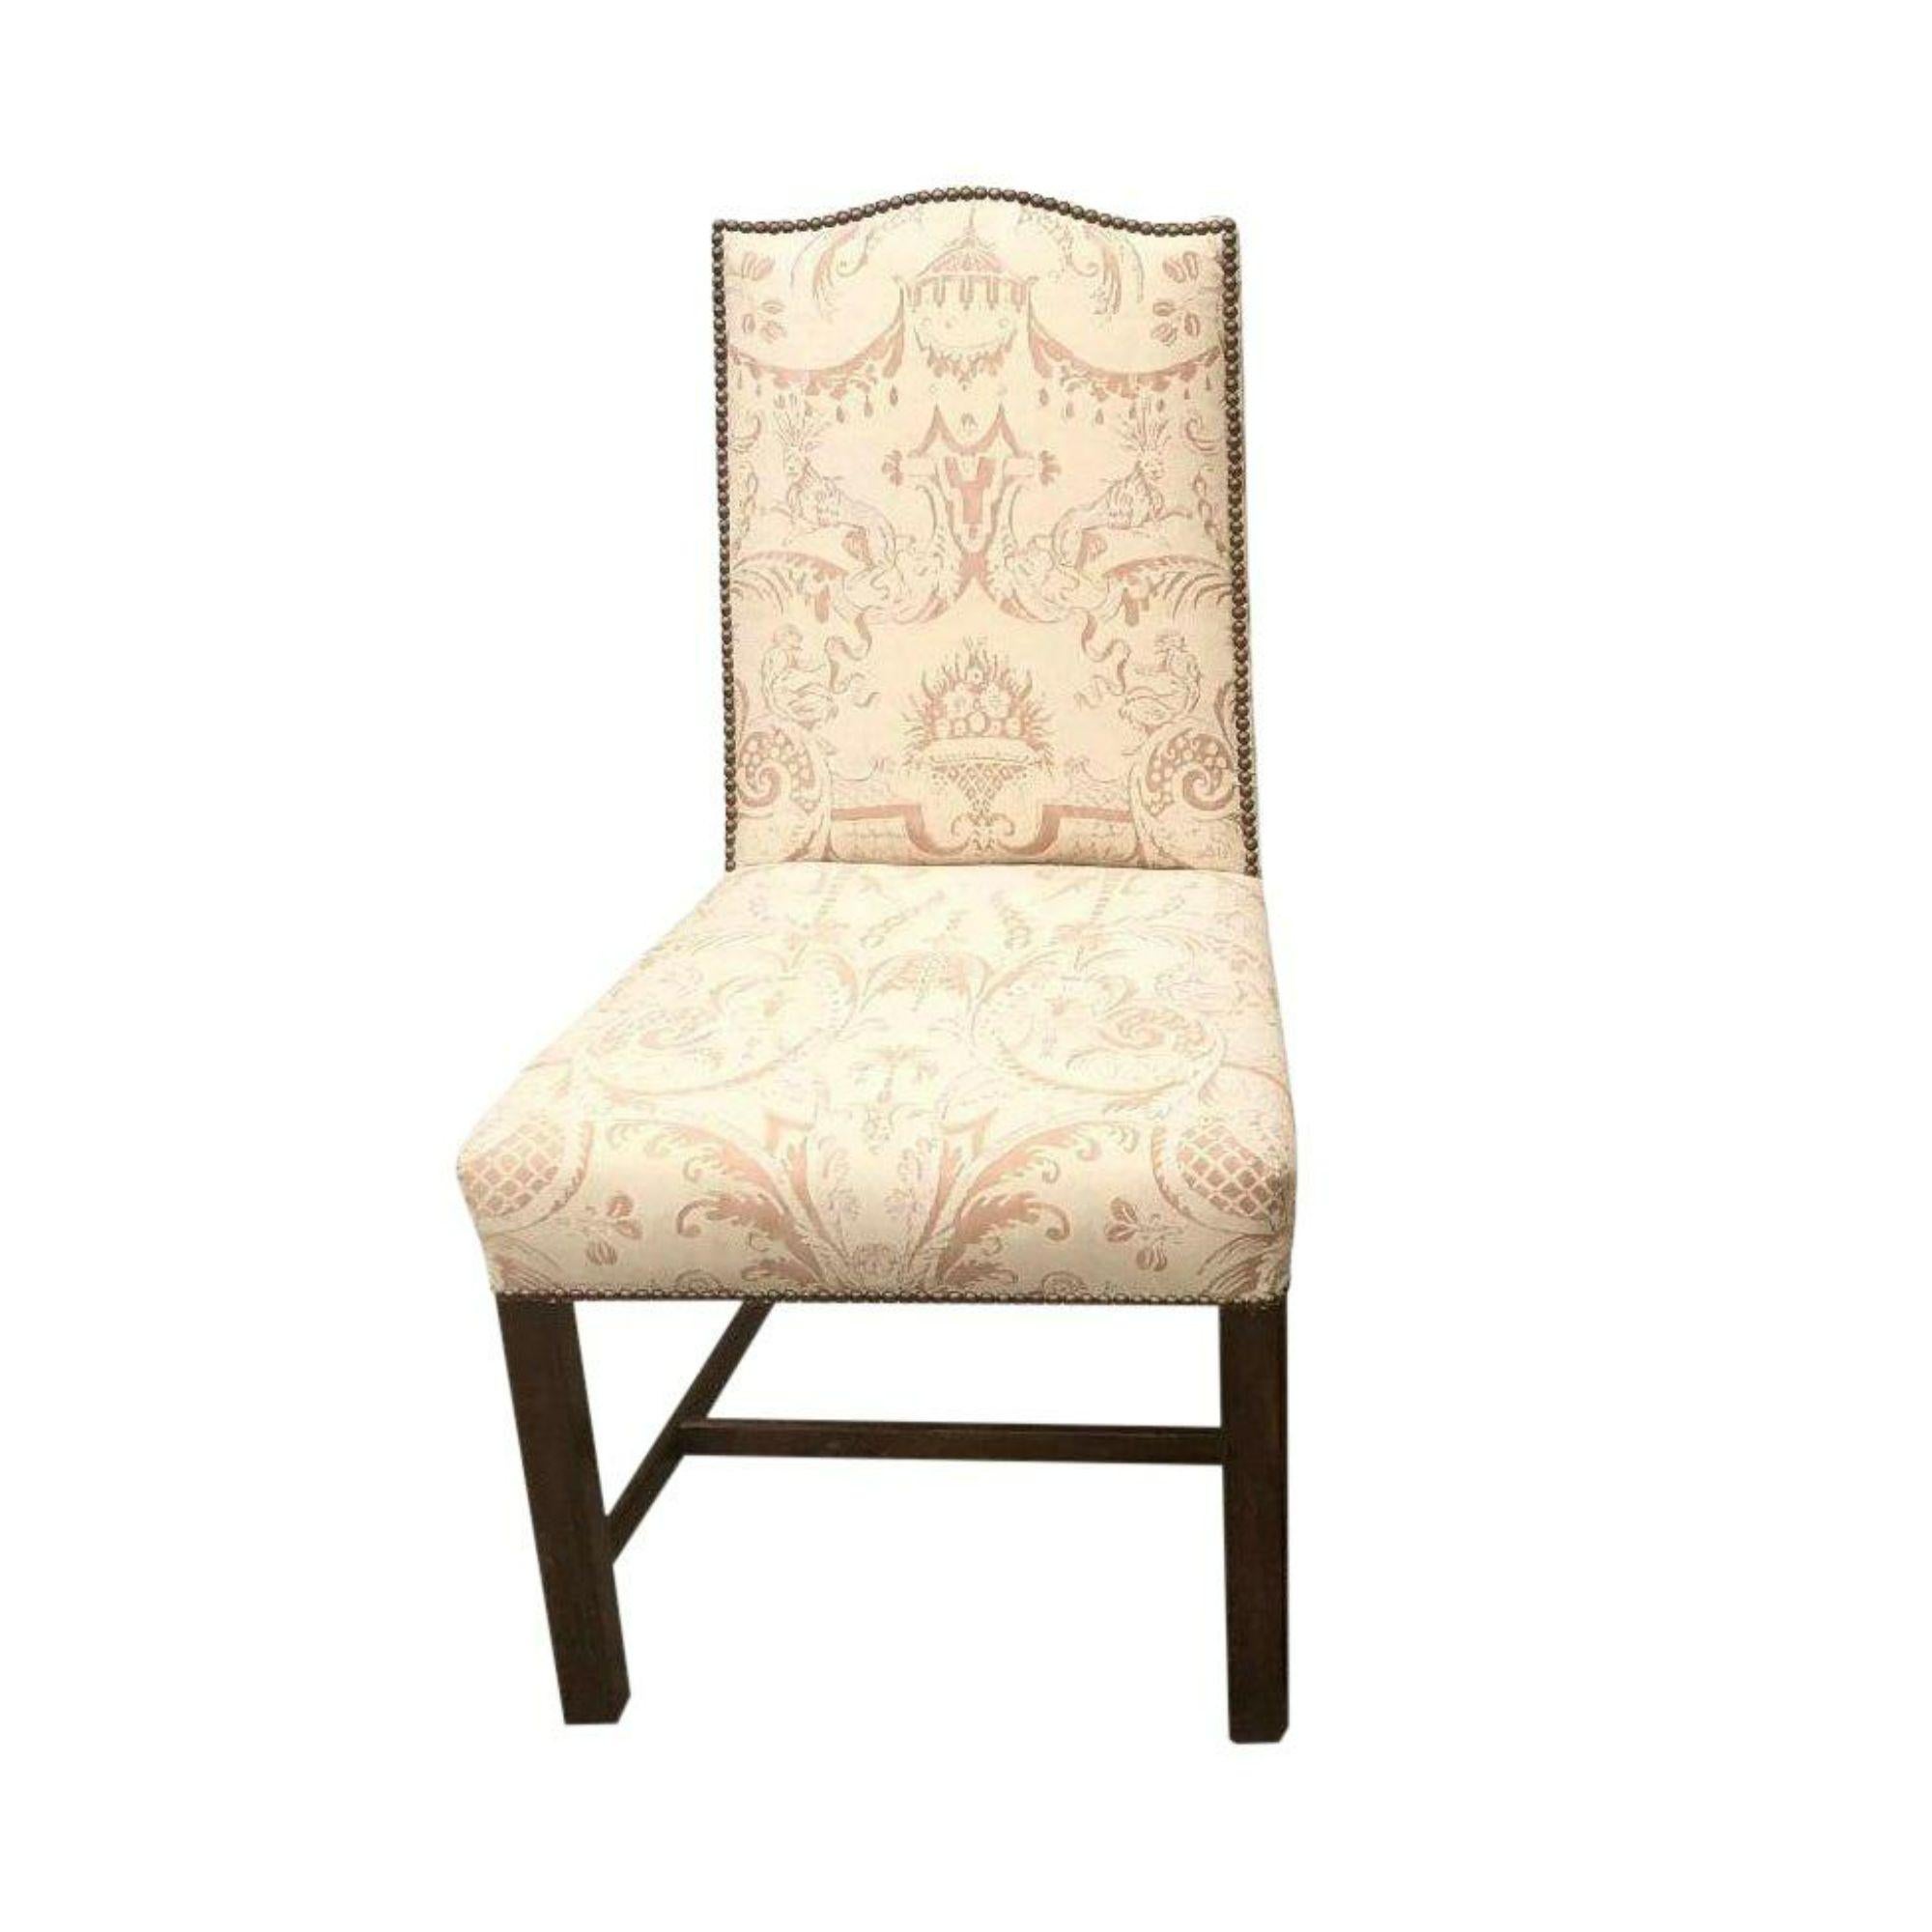 Priced each! Fortuny upholstered antique Chinese chippendale designer chair

Additional information: 
Materials: cotton, mahogany 
Color: beige
Brand: Fortuny
Designer: Fortuny
Period: Mid-20th Century
Place of origin: Italy
Styles: